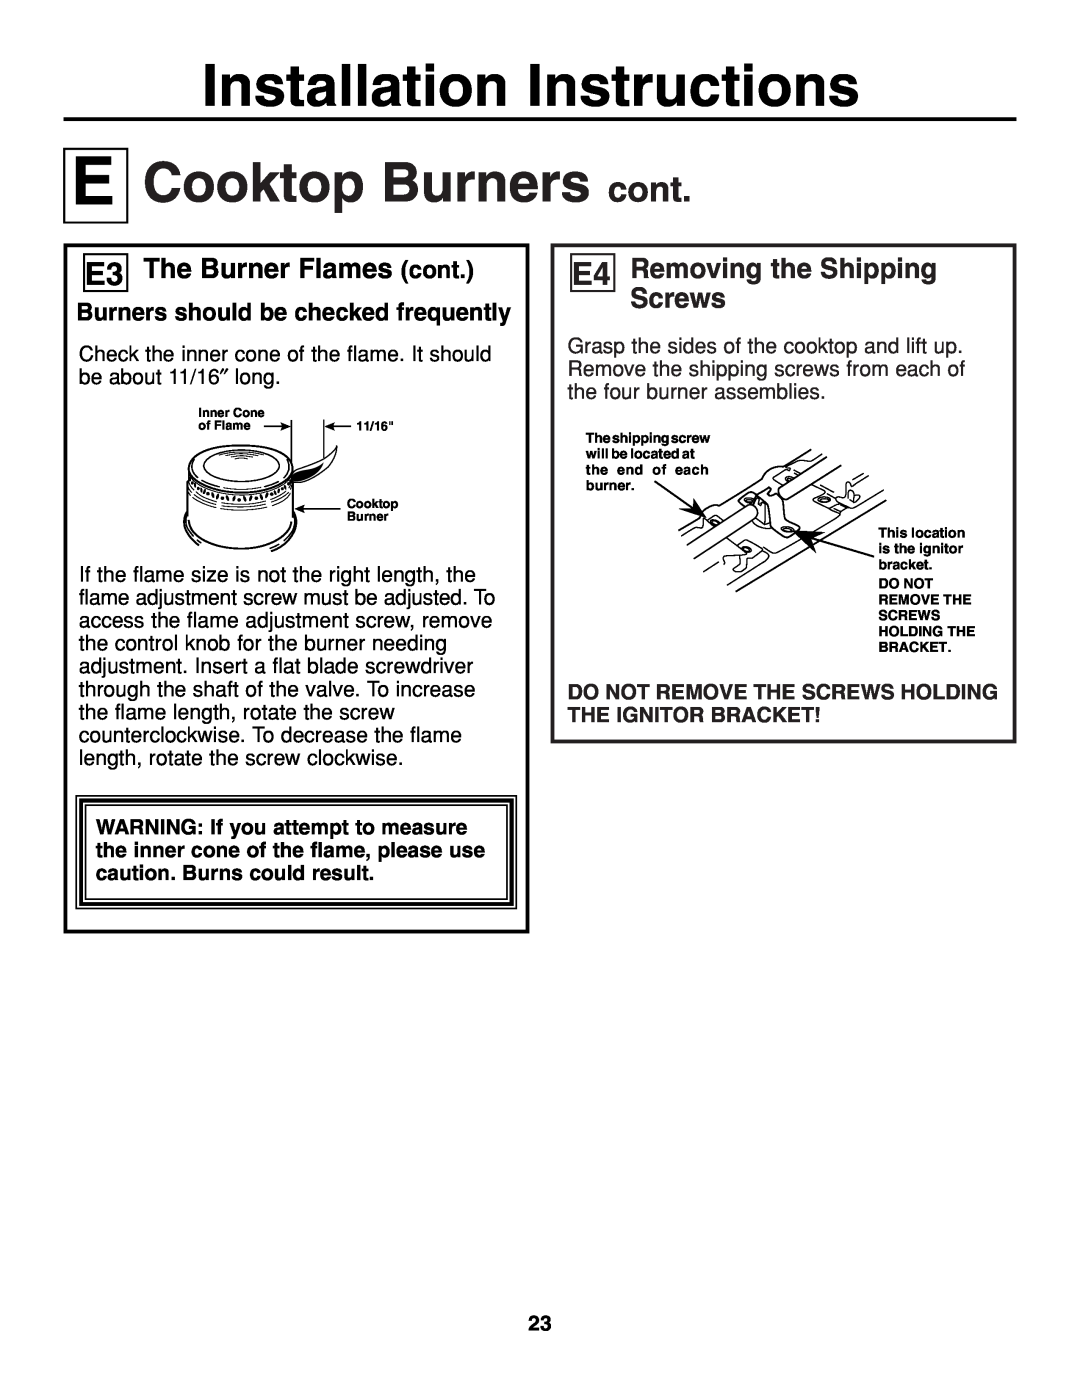 GE JGP321 Cooktop Burners cont, E3 The Burner Flames cont, E4 Removing the Shipping Screws, Installation Instructions 